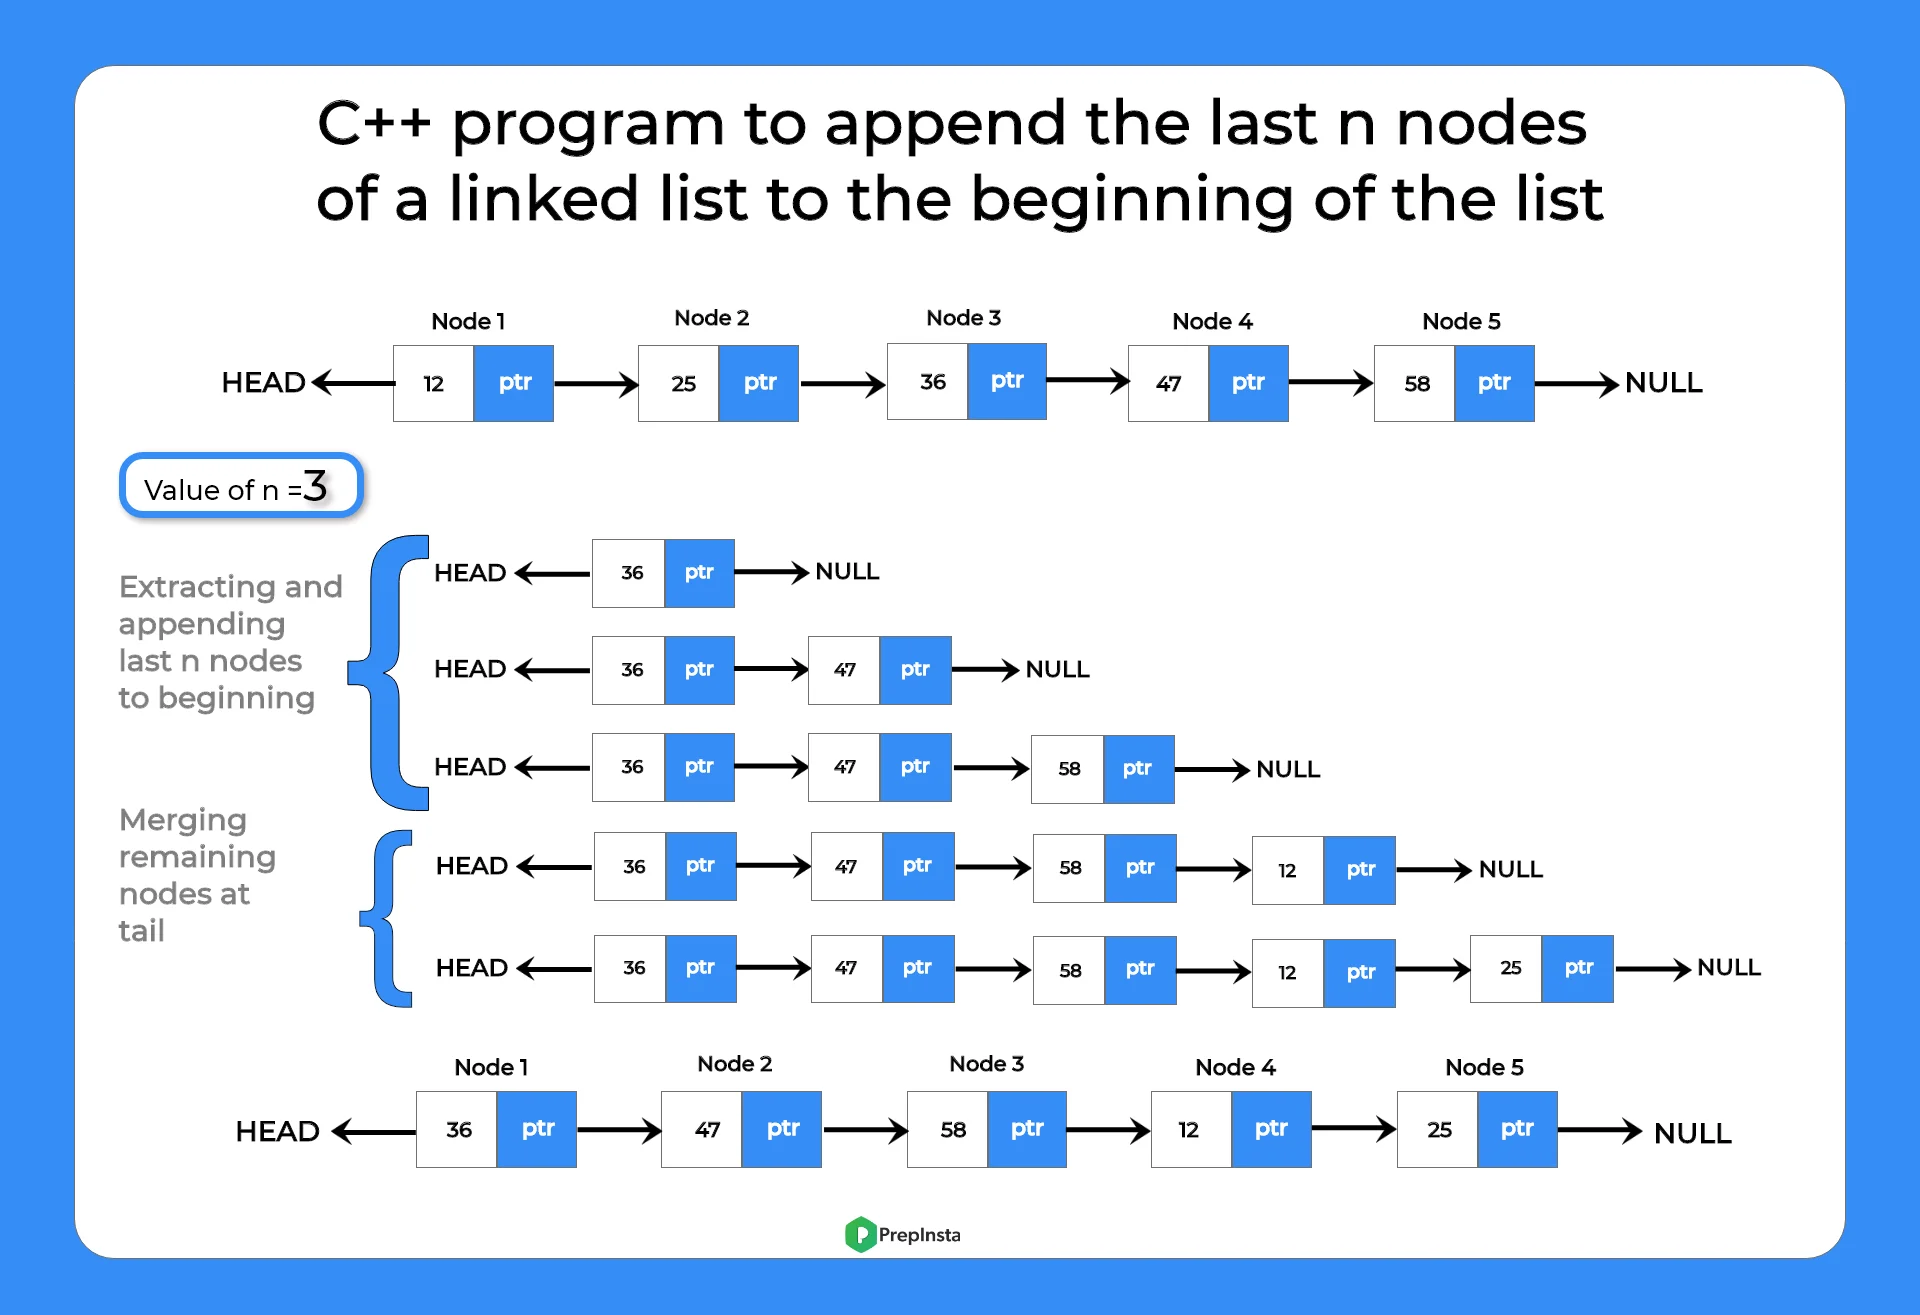 C++ program to append last n nodes of a linked list to the beginning of the list